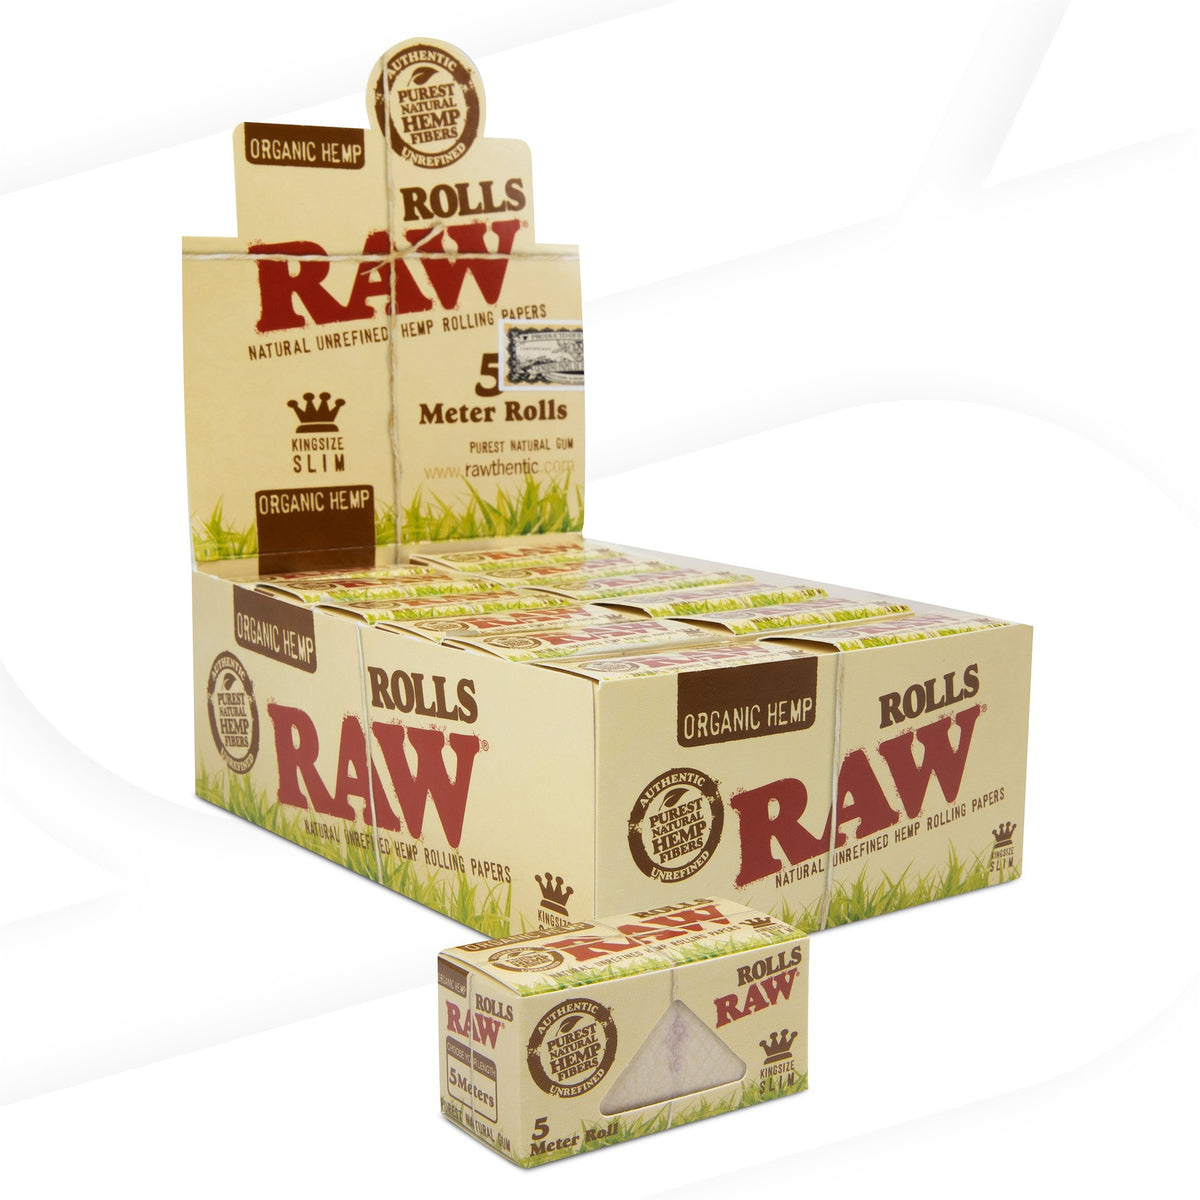 RAW Organic King Size Slim Paper Rolls - 5 Meters Rolling Papers WAR00377-MUSA01 esd-official